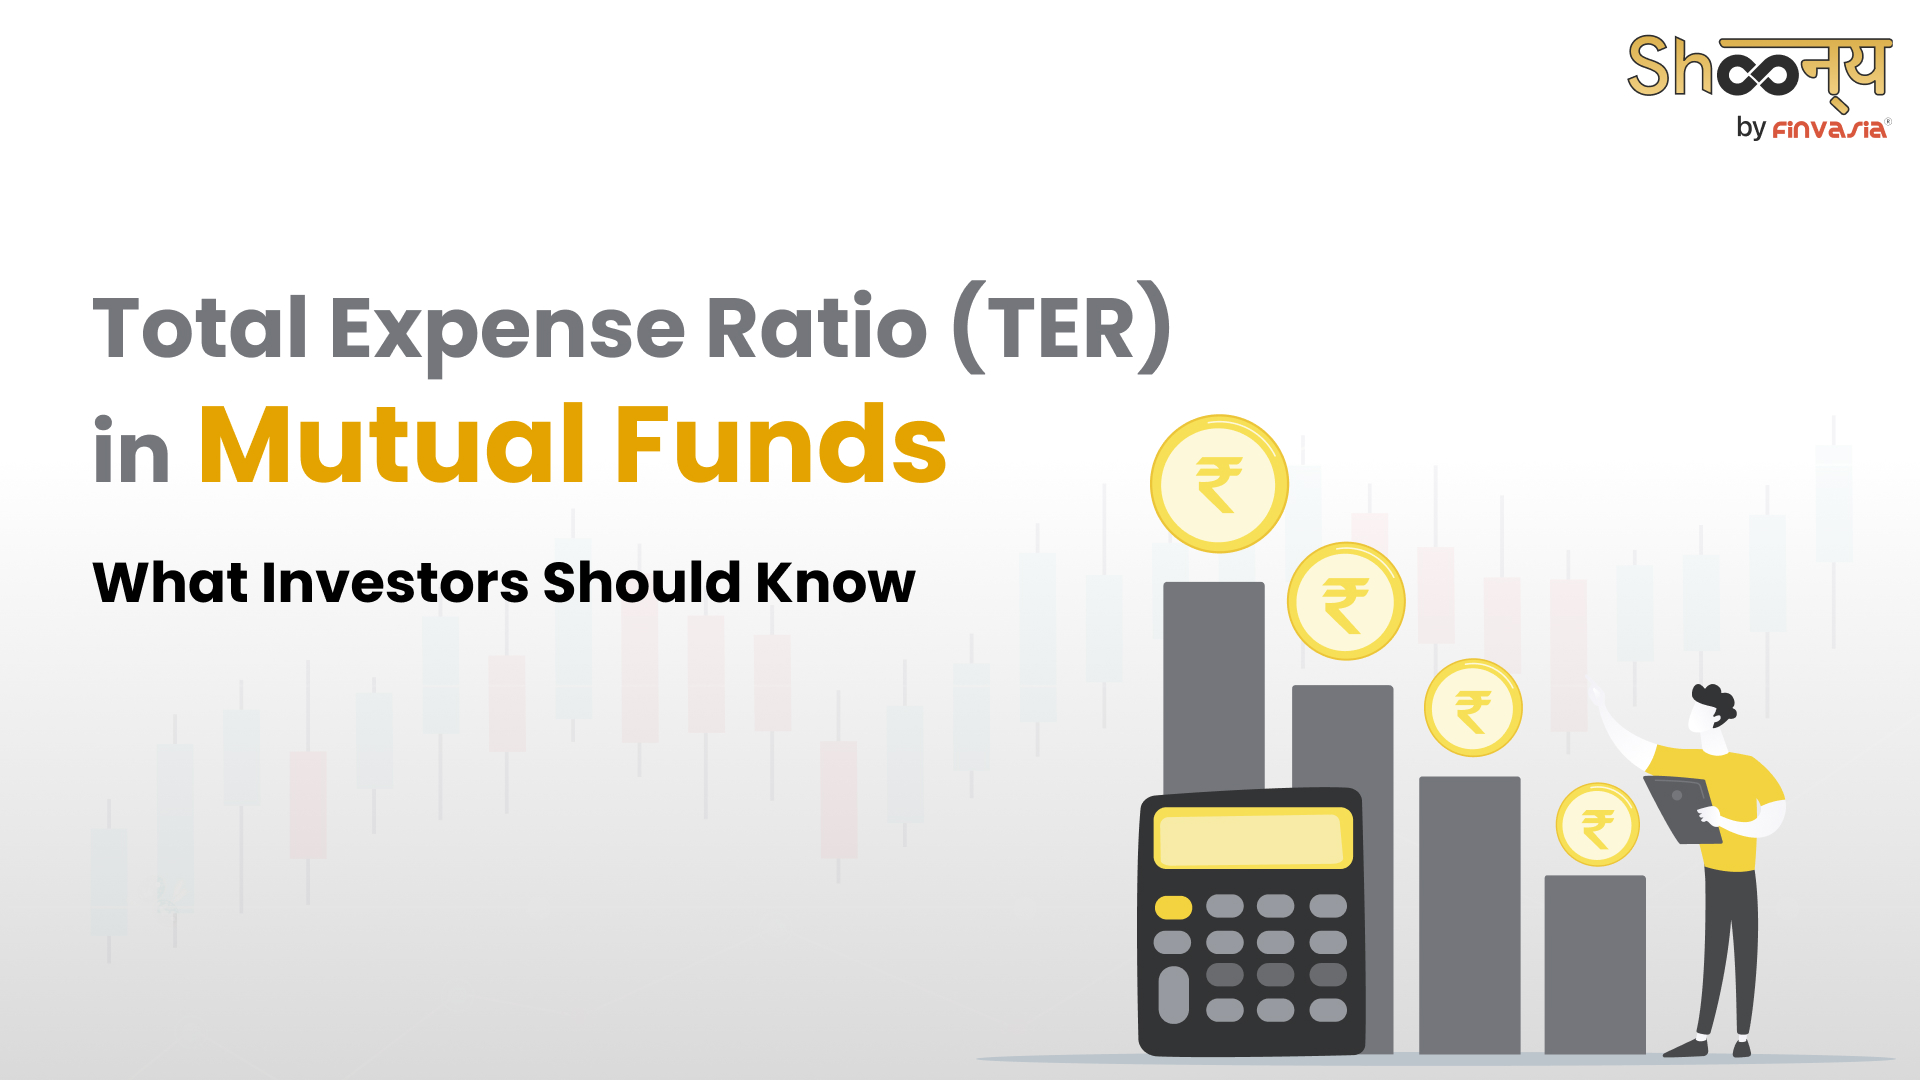 Total Expense Ratio (TER) in Mutual Funds